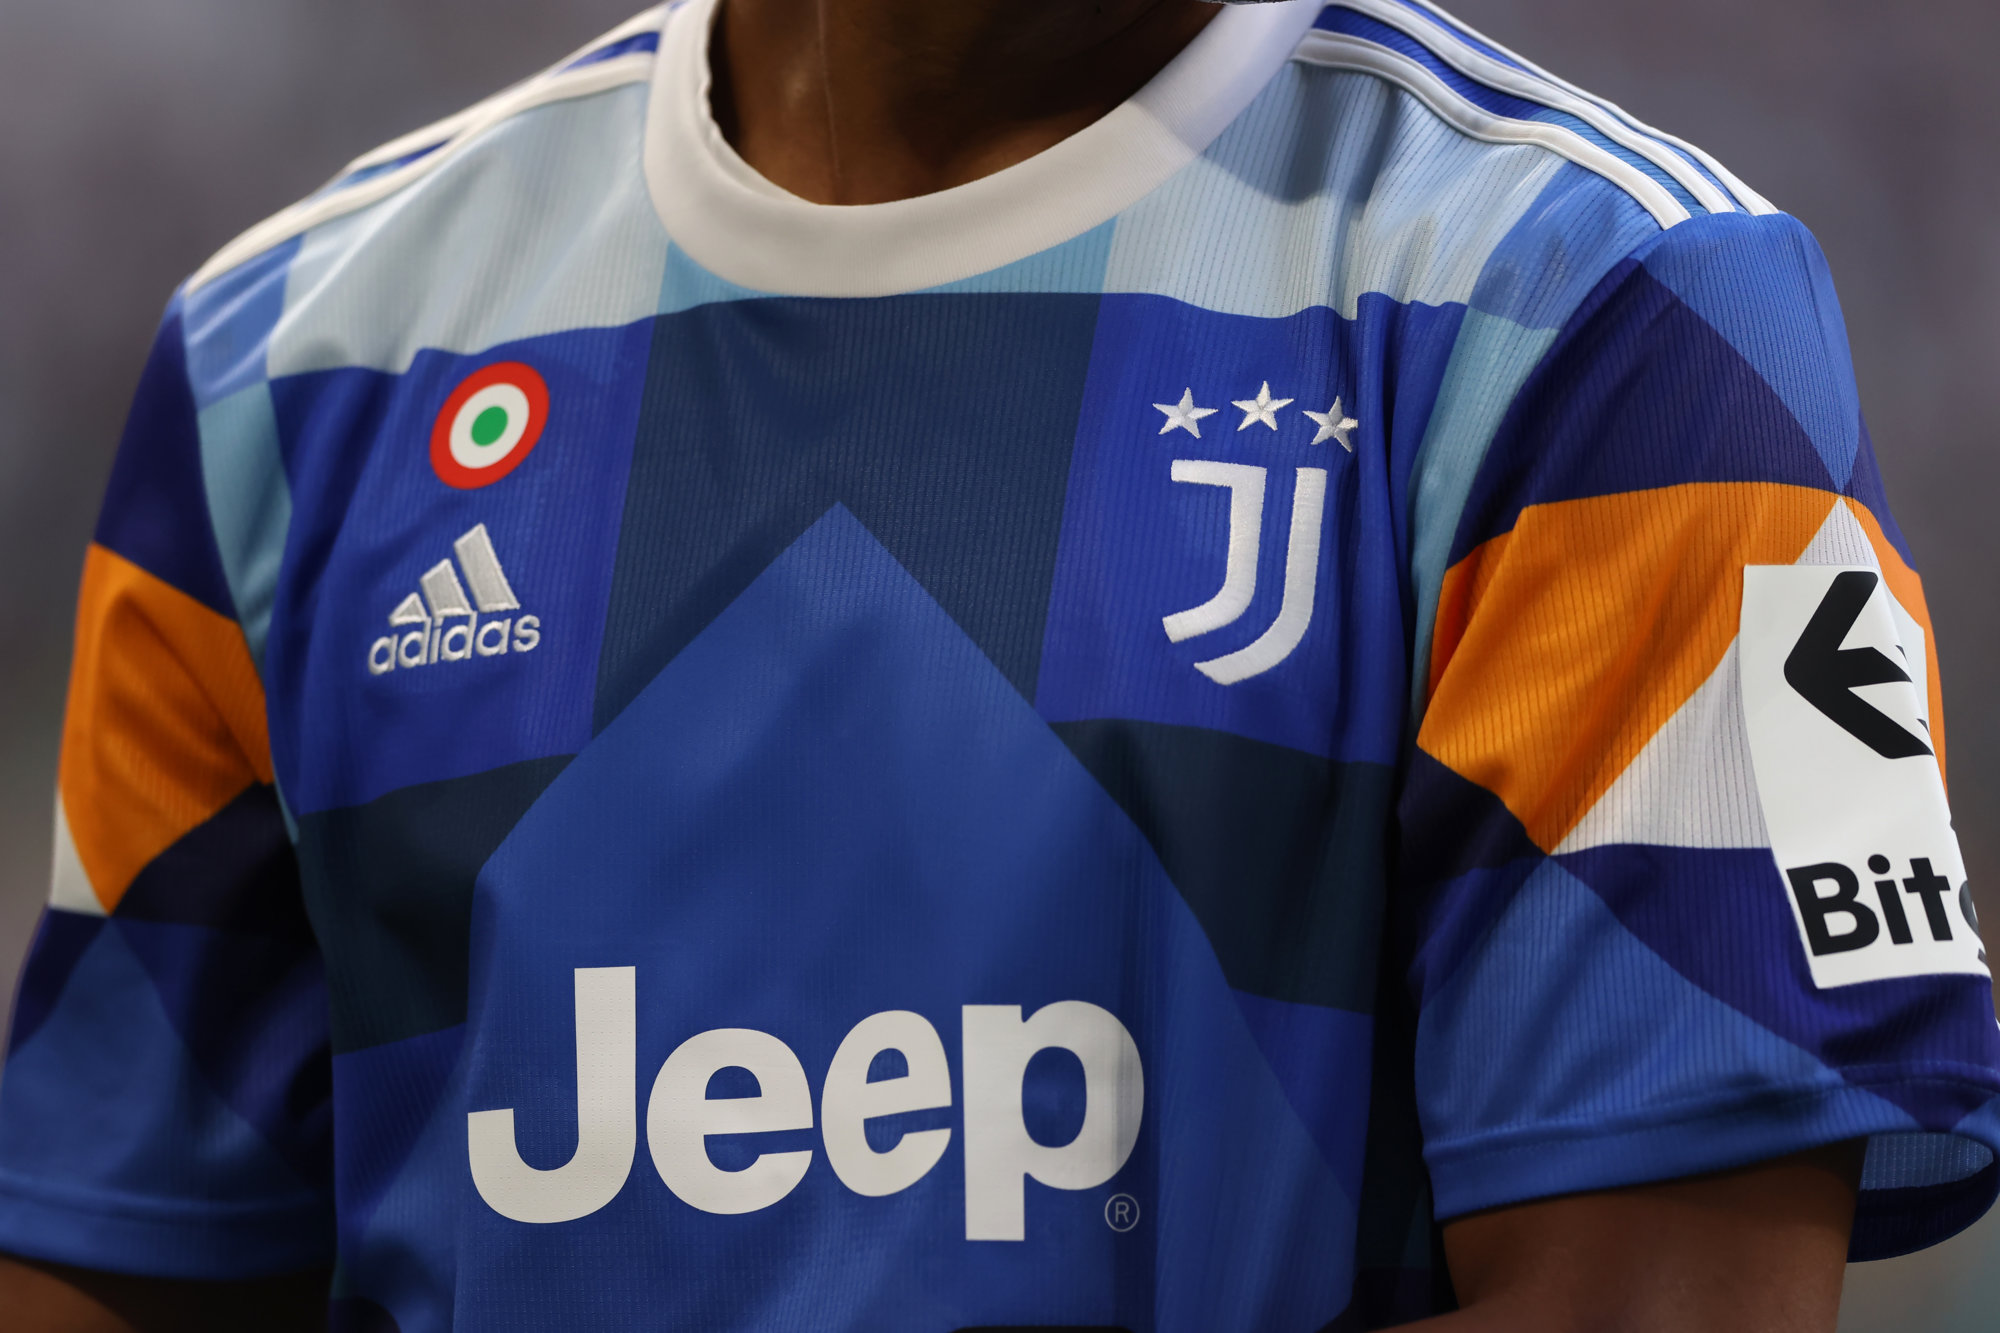 The best football kits for the 2022/23 season